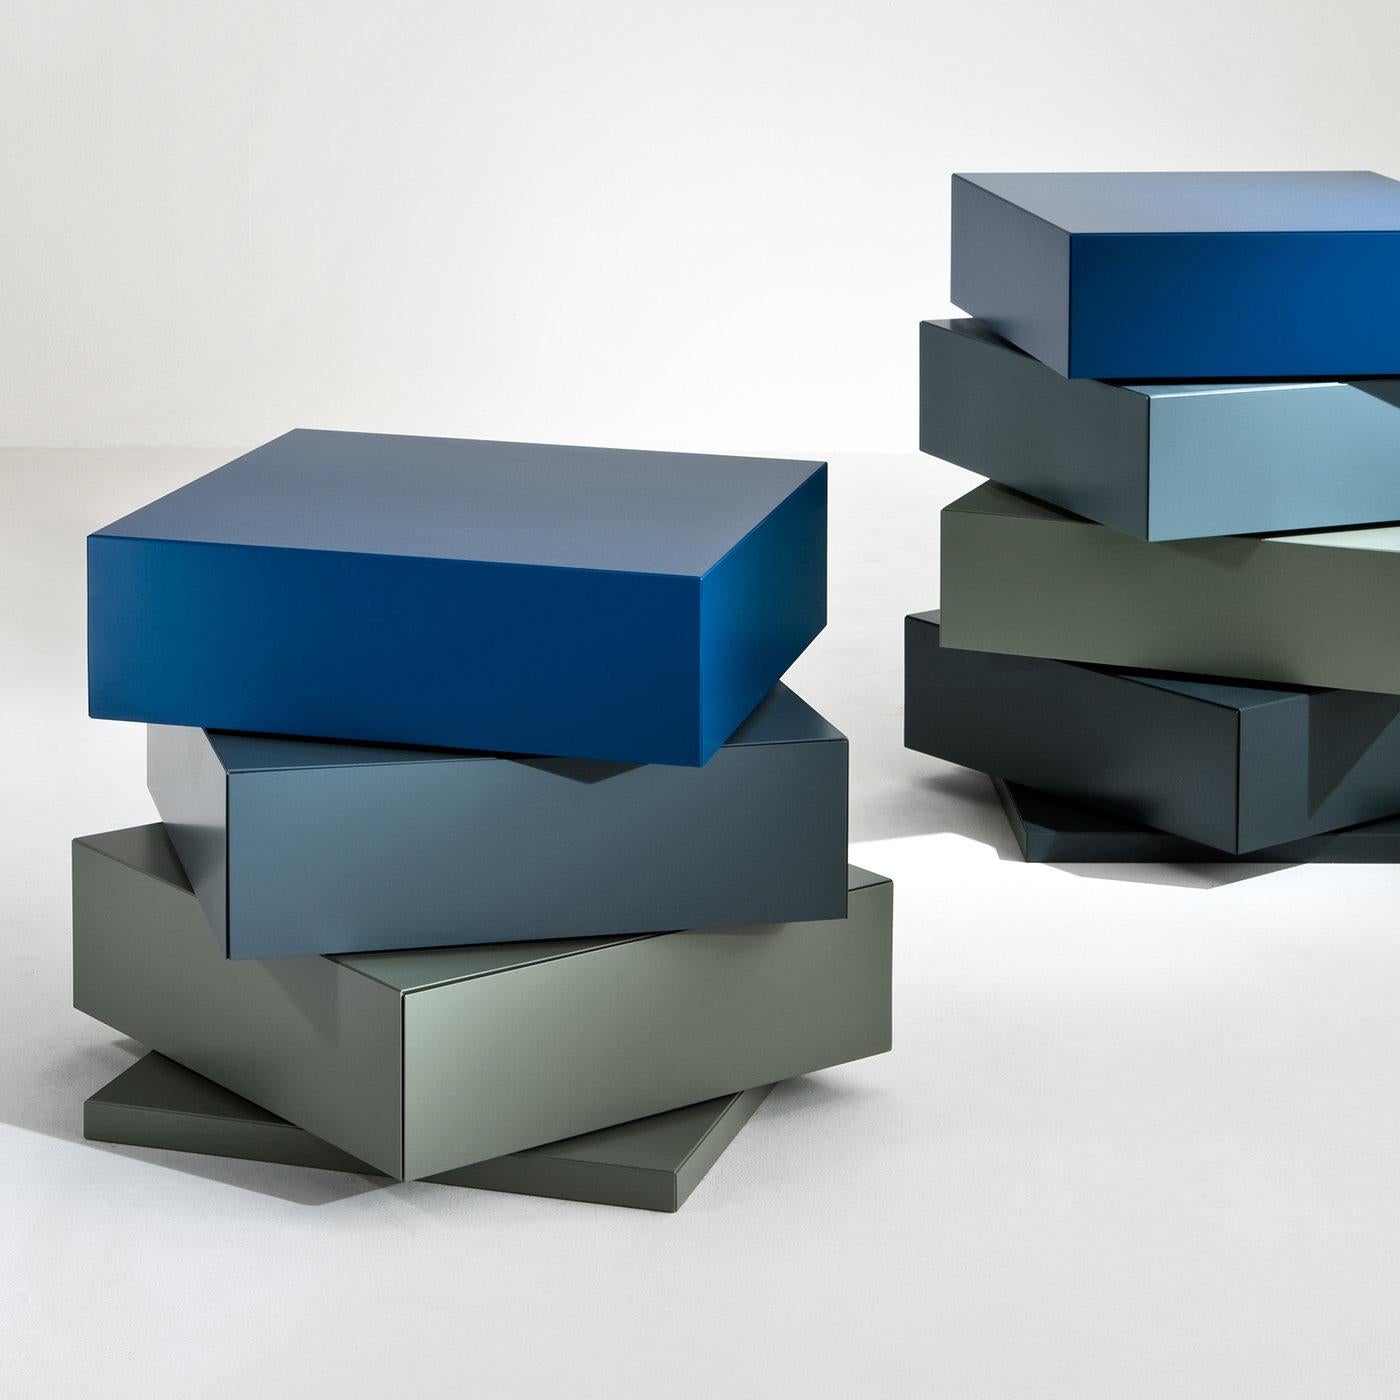 Hand-Crafted Cubick Swivel Chest of Drawers by Paolo Nicolò Rusolen